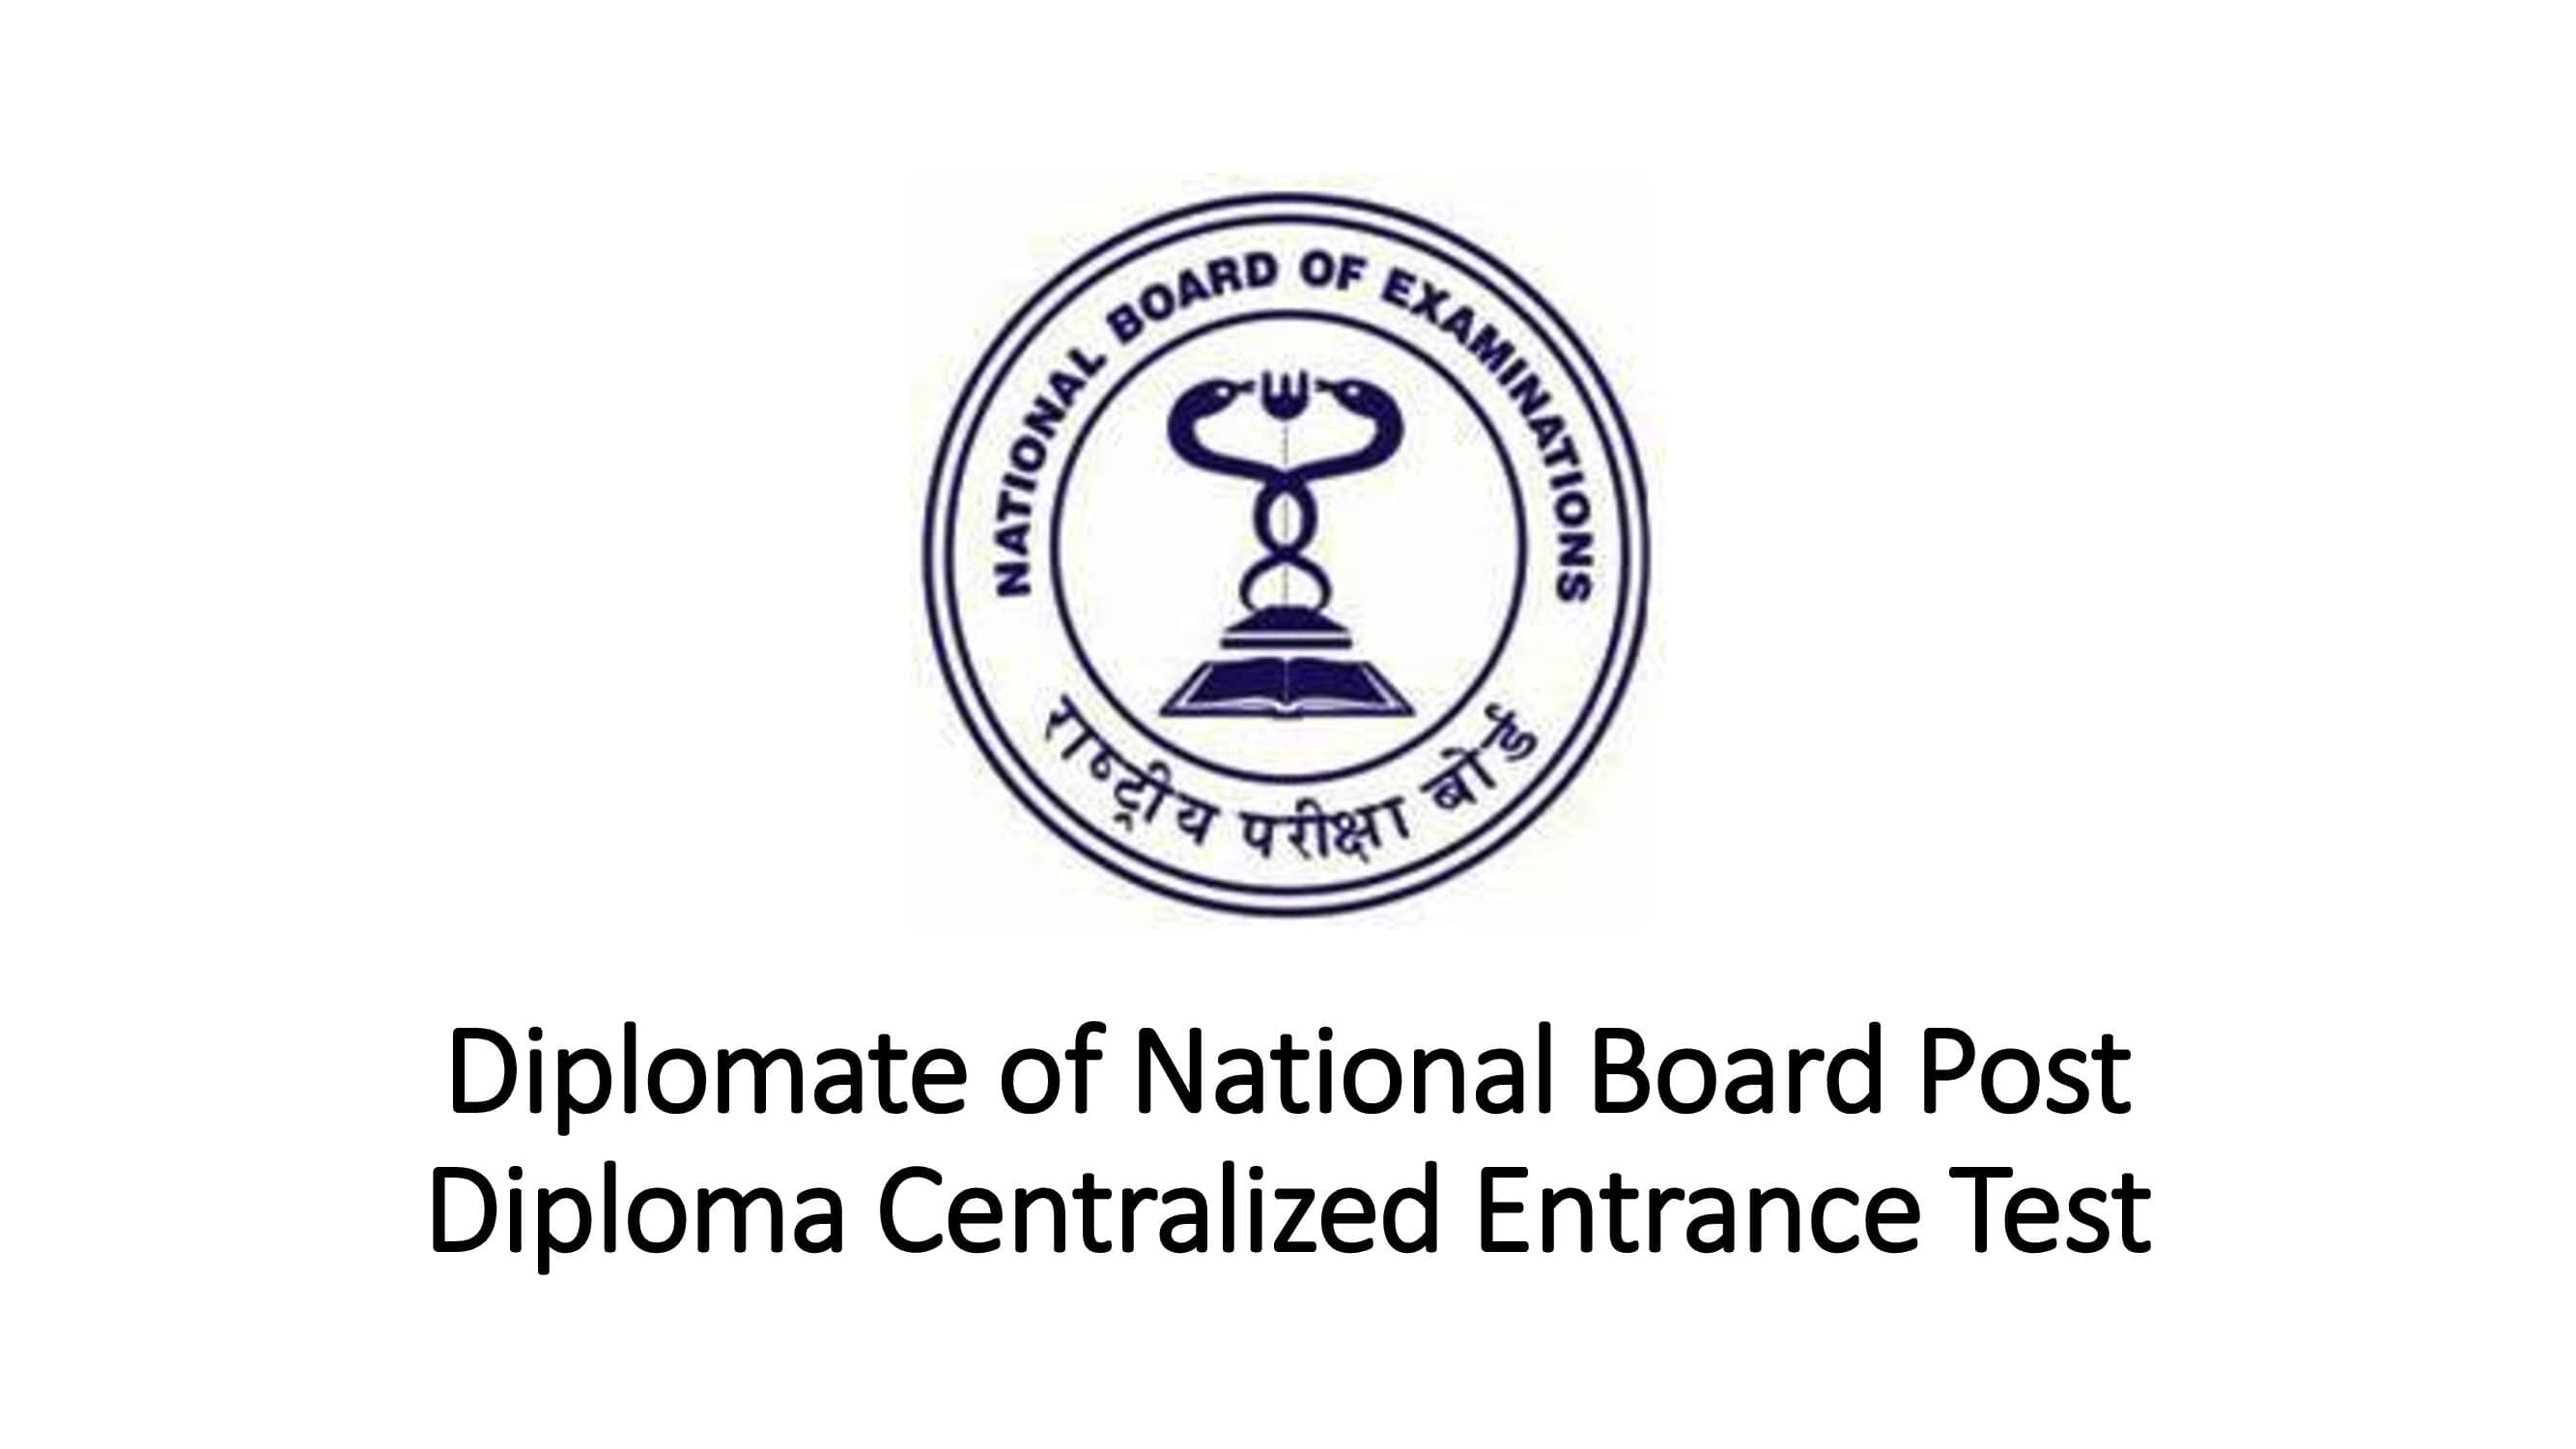 Diplomate of National Board Post Diploma Centralized Entrance Test